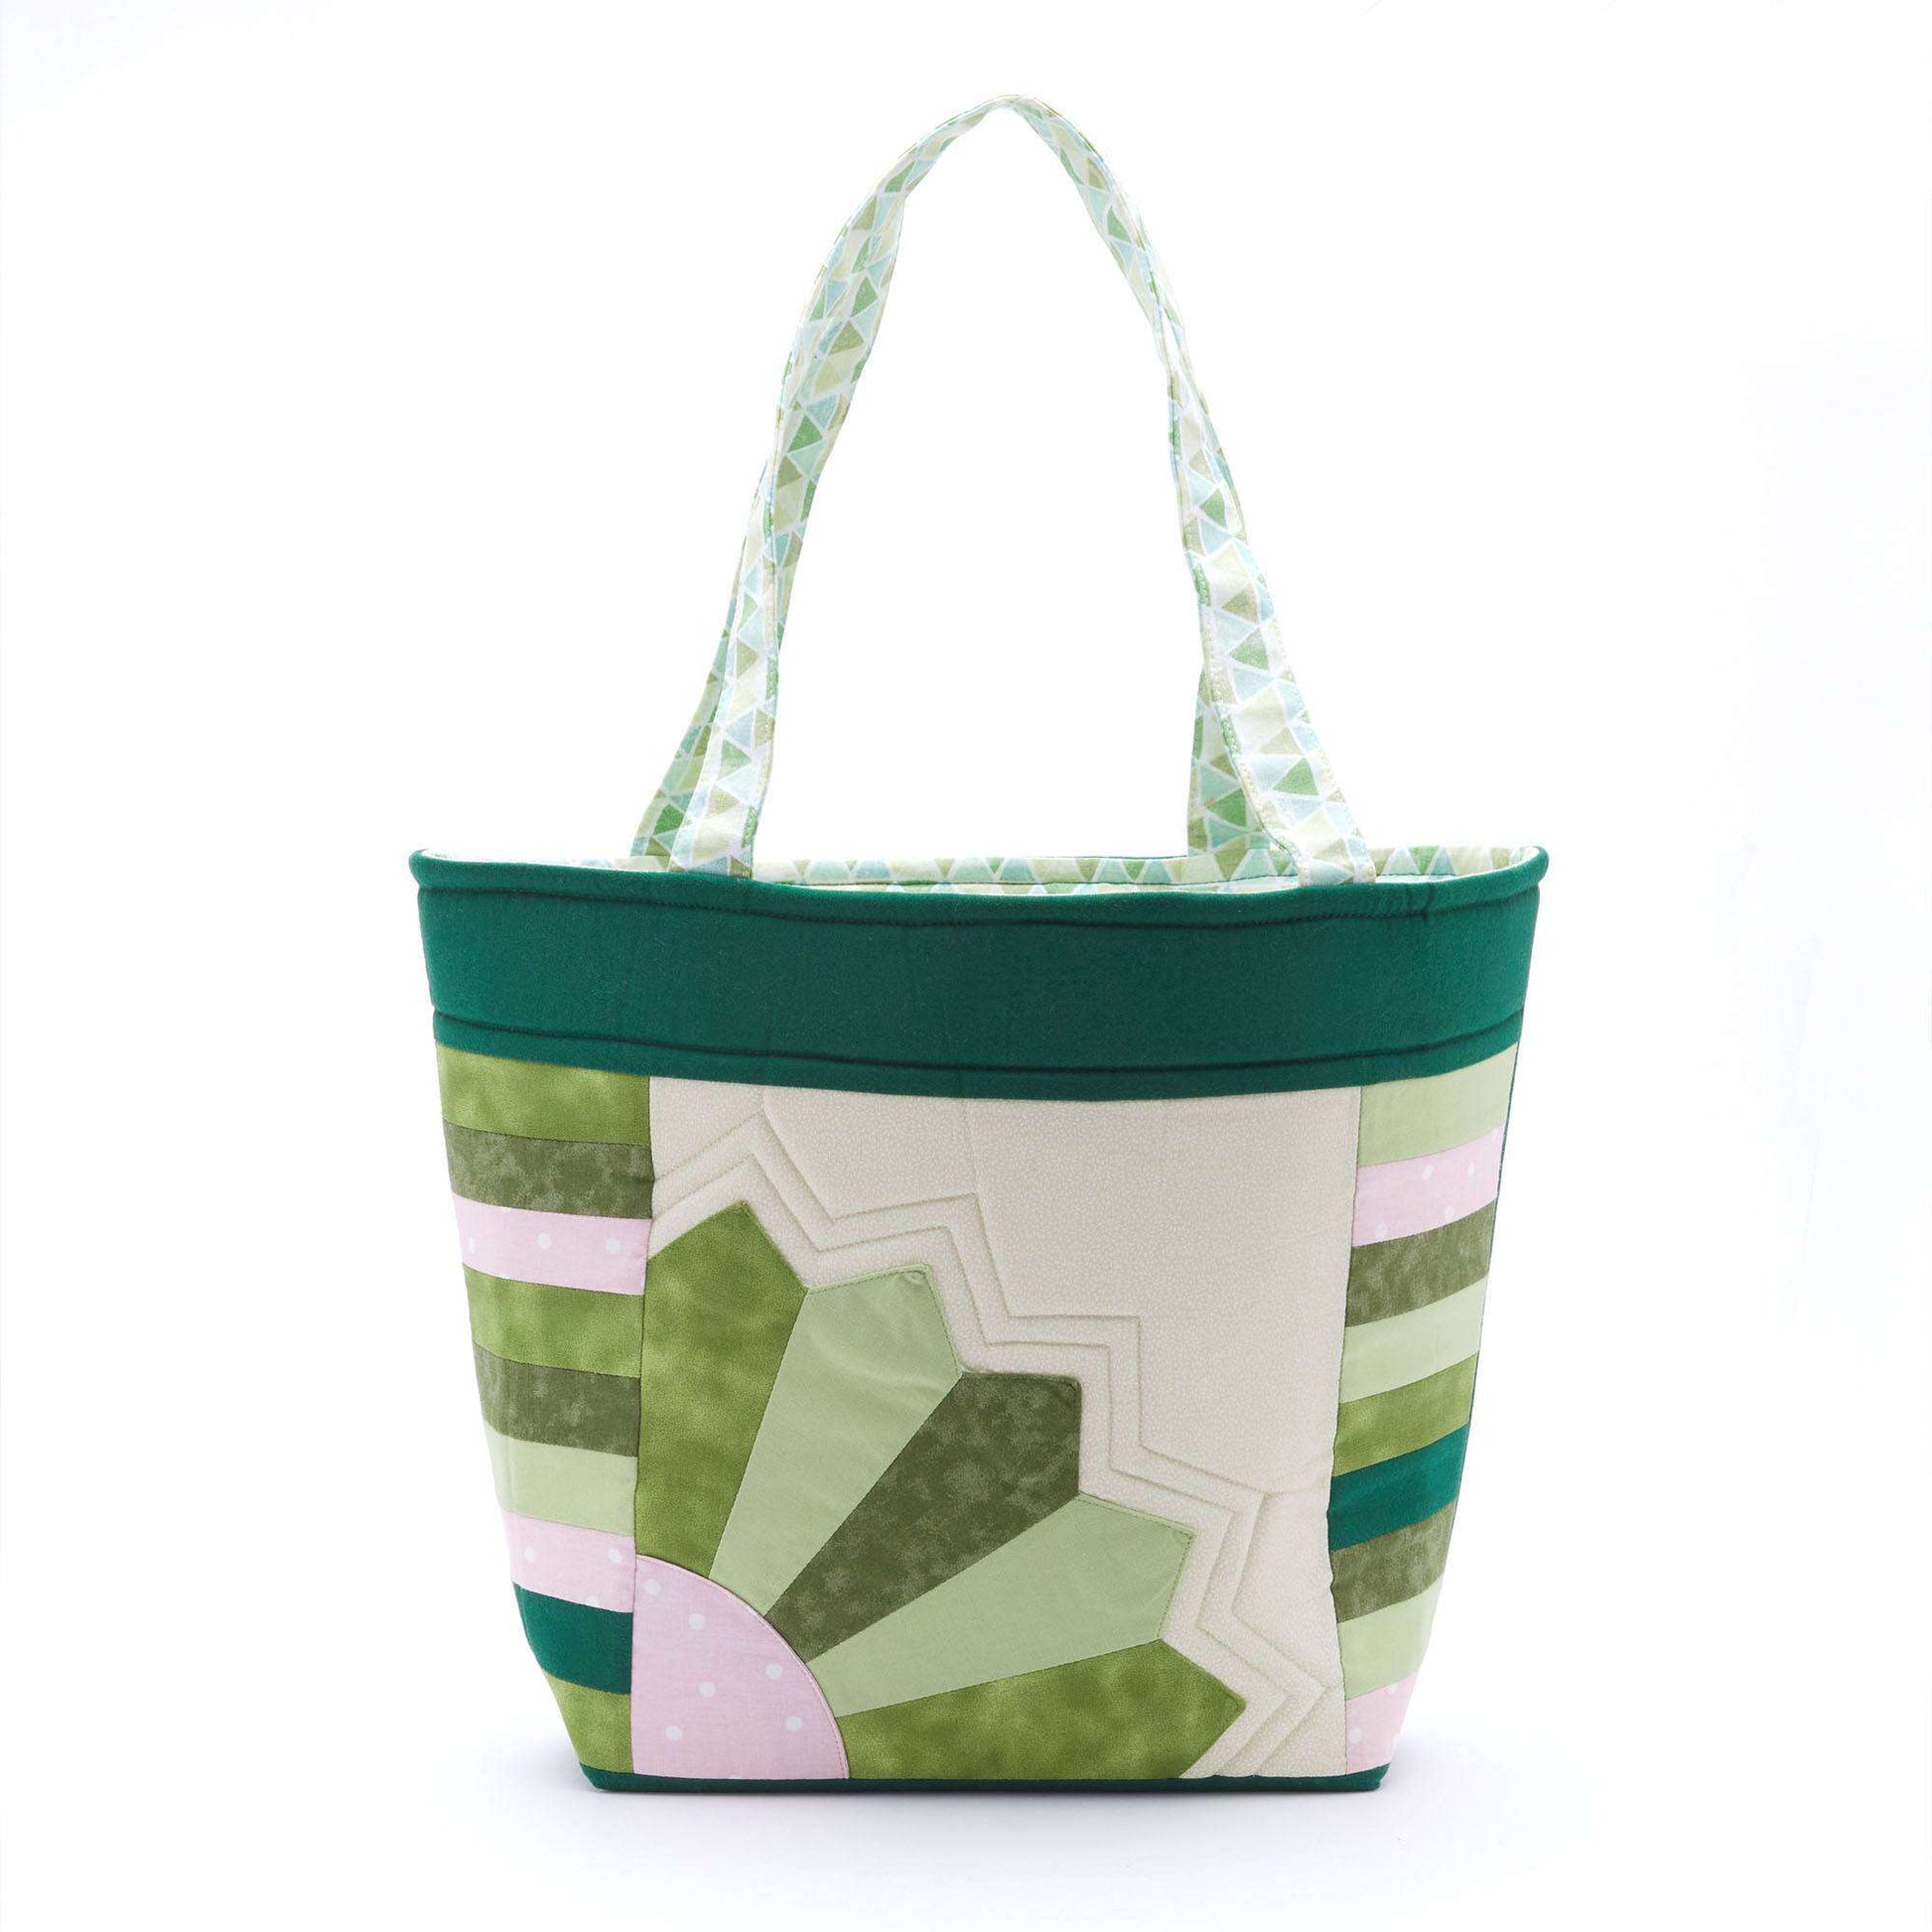 Free Coats & Clark Quilt Block Tote Quilting Pattern